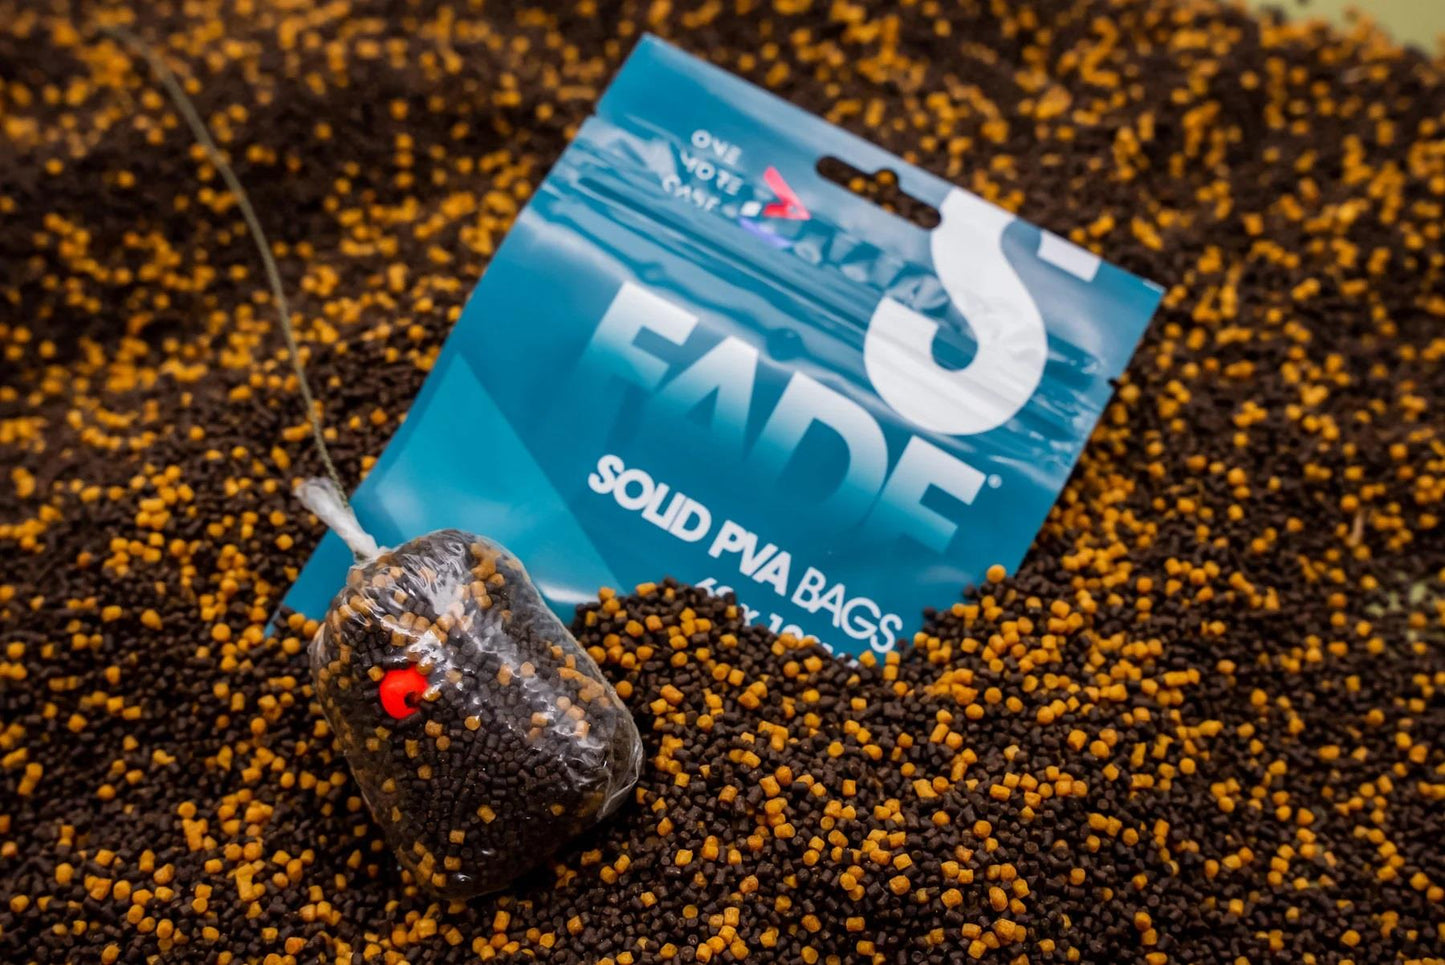 One More Cast Fade Solid PVA Bags